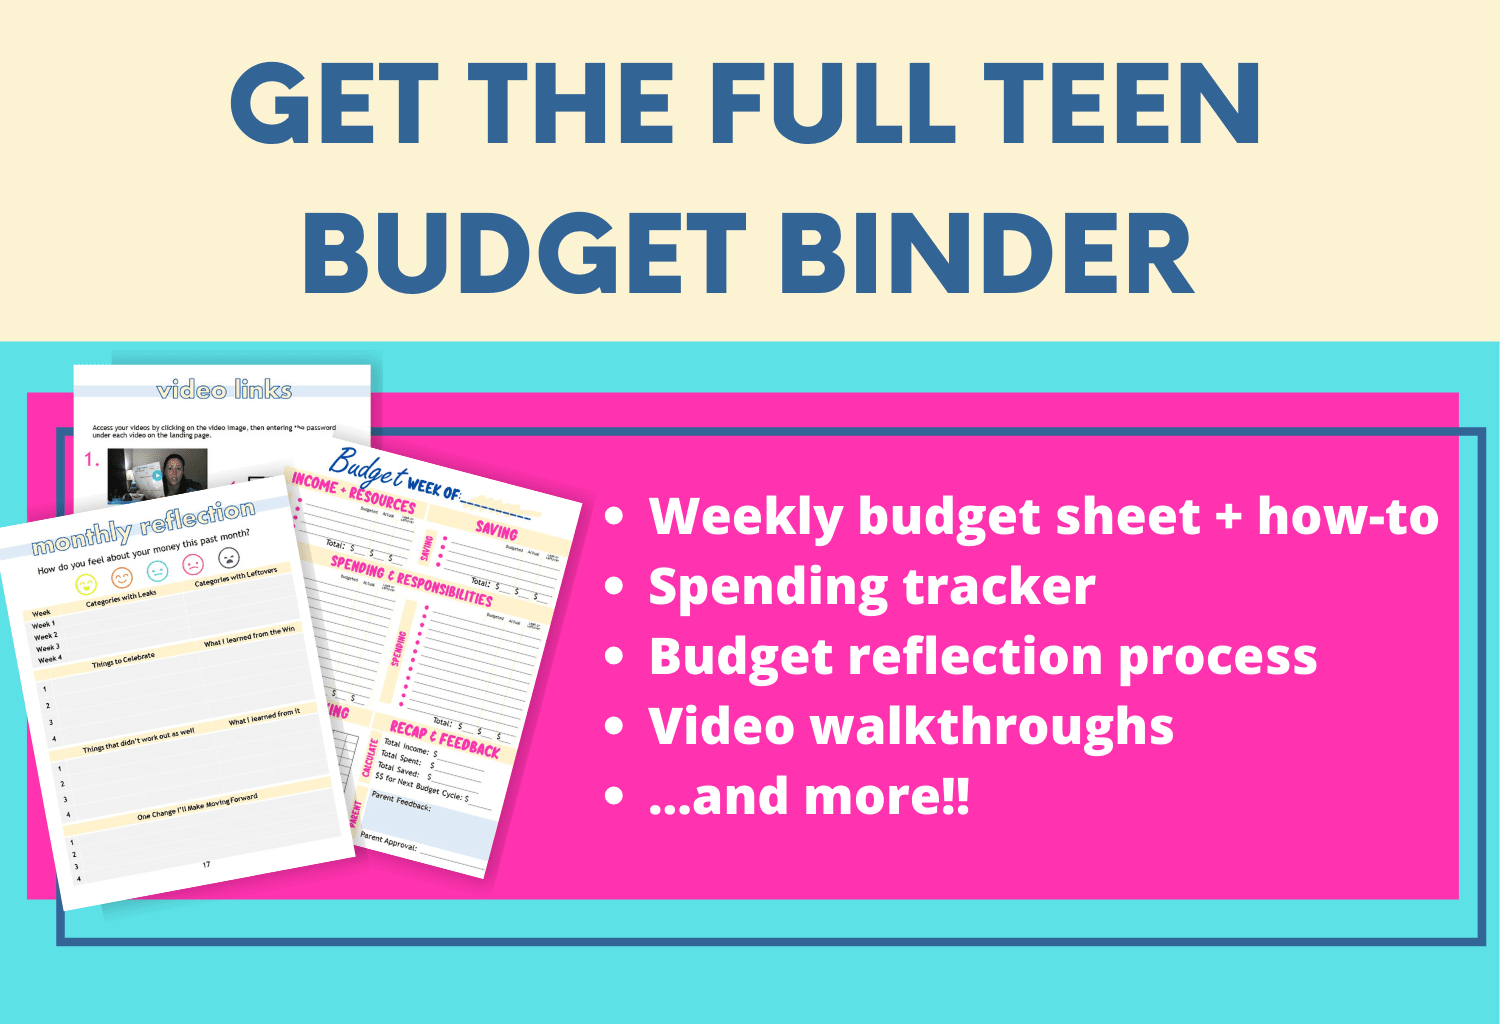 large pink, blue, and tan button with images of teen budget binder, text overlay "get the teen budget binder - weekly budget sheet and how-to, spending tracker, budgeting reflection process, videos, more"